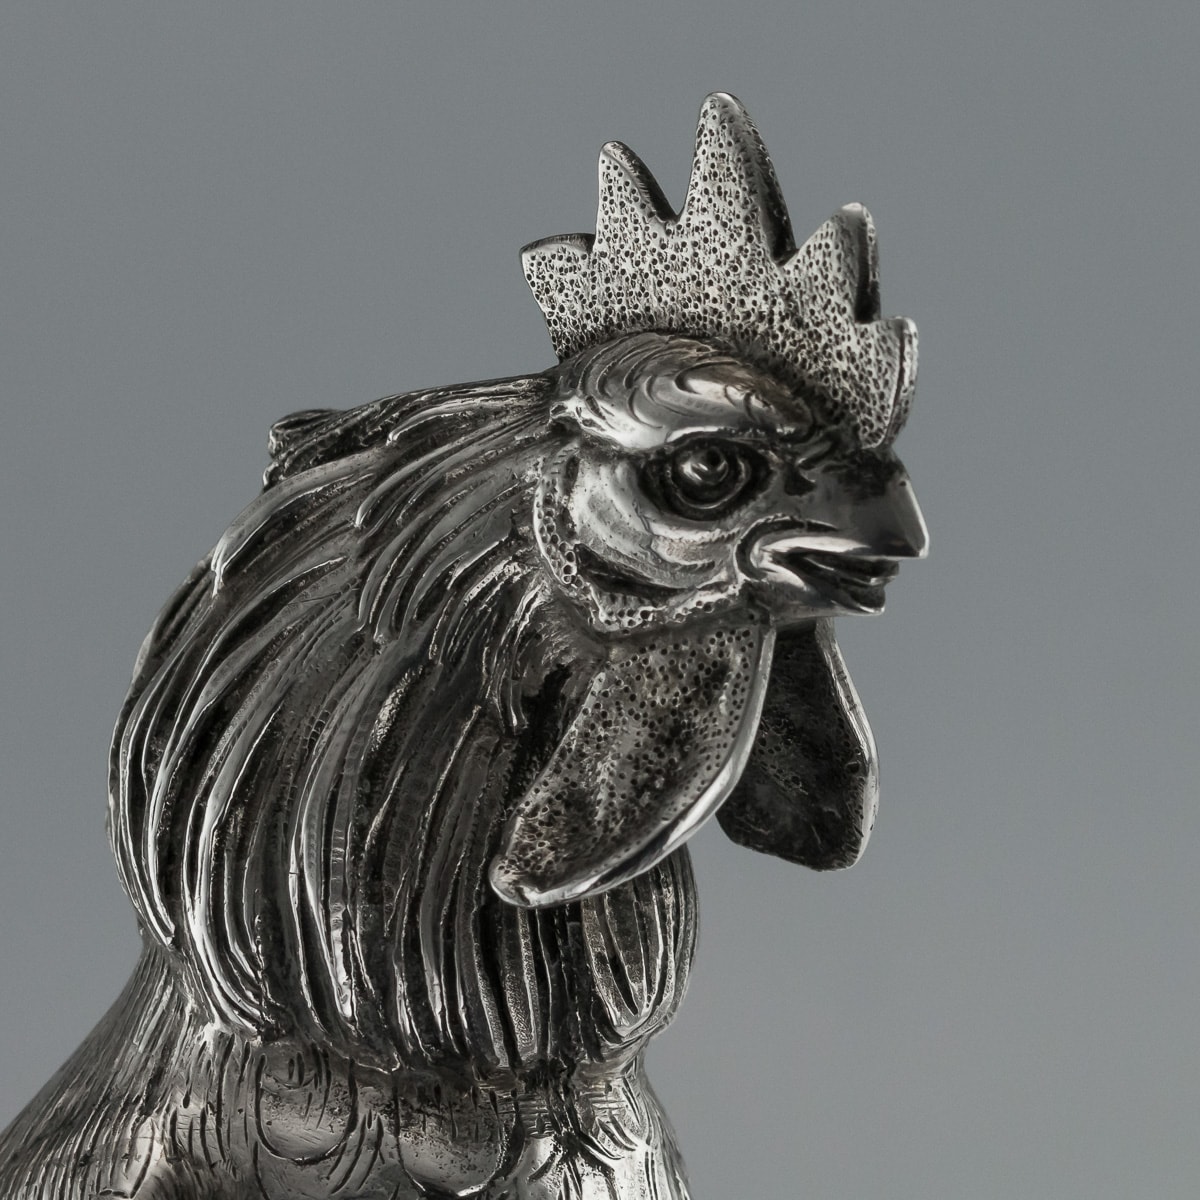 A PAIR OF GERMAN SILVER TABLE ORNAMENTS MODELLED AS FIGHTING COCKERELS - Image 32 of 41